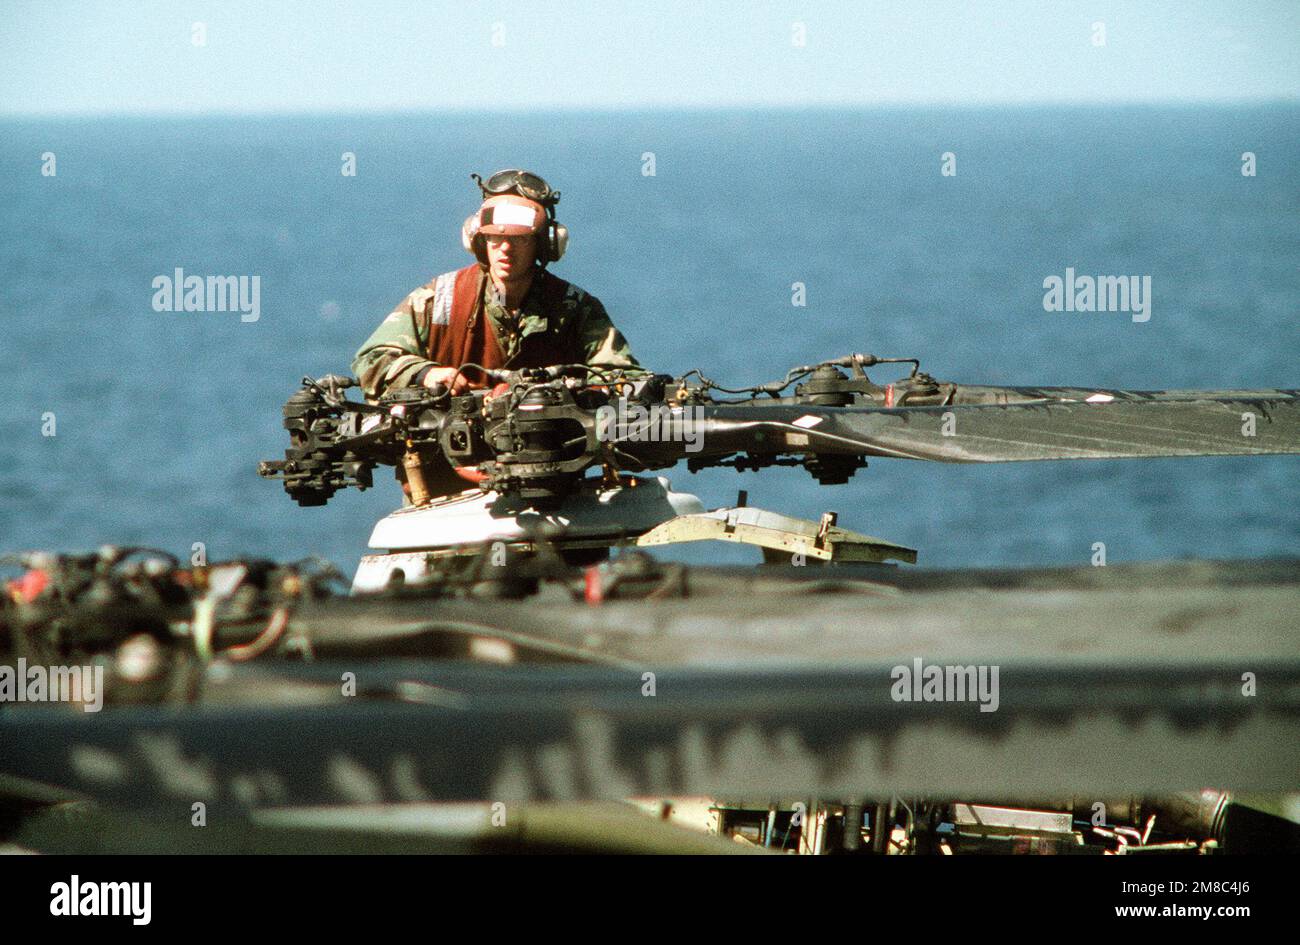 A flight deck crewman services the rotor hub of a helicopter during PACEX '89. Subject Operation/Series: PACEX '89 Country: Unknown Stock Photo